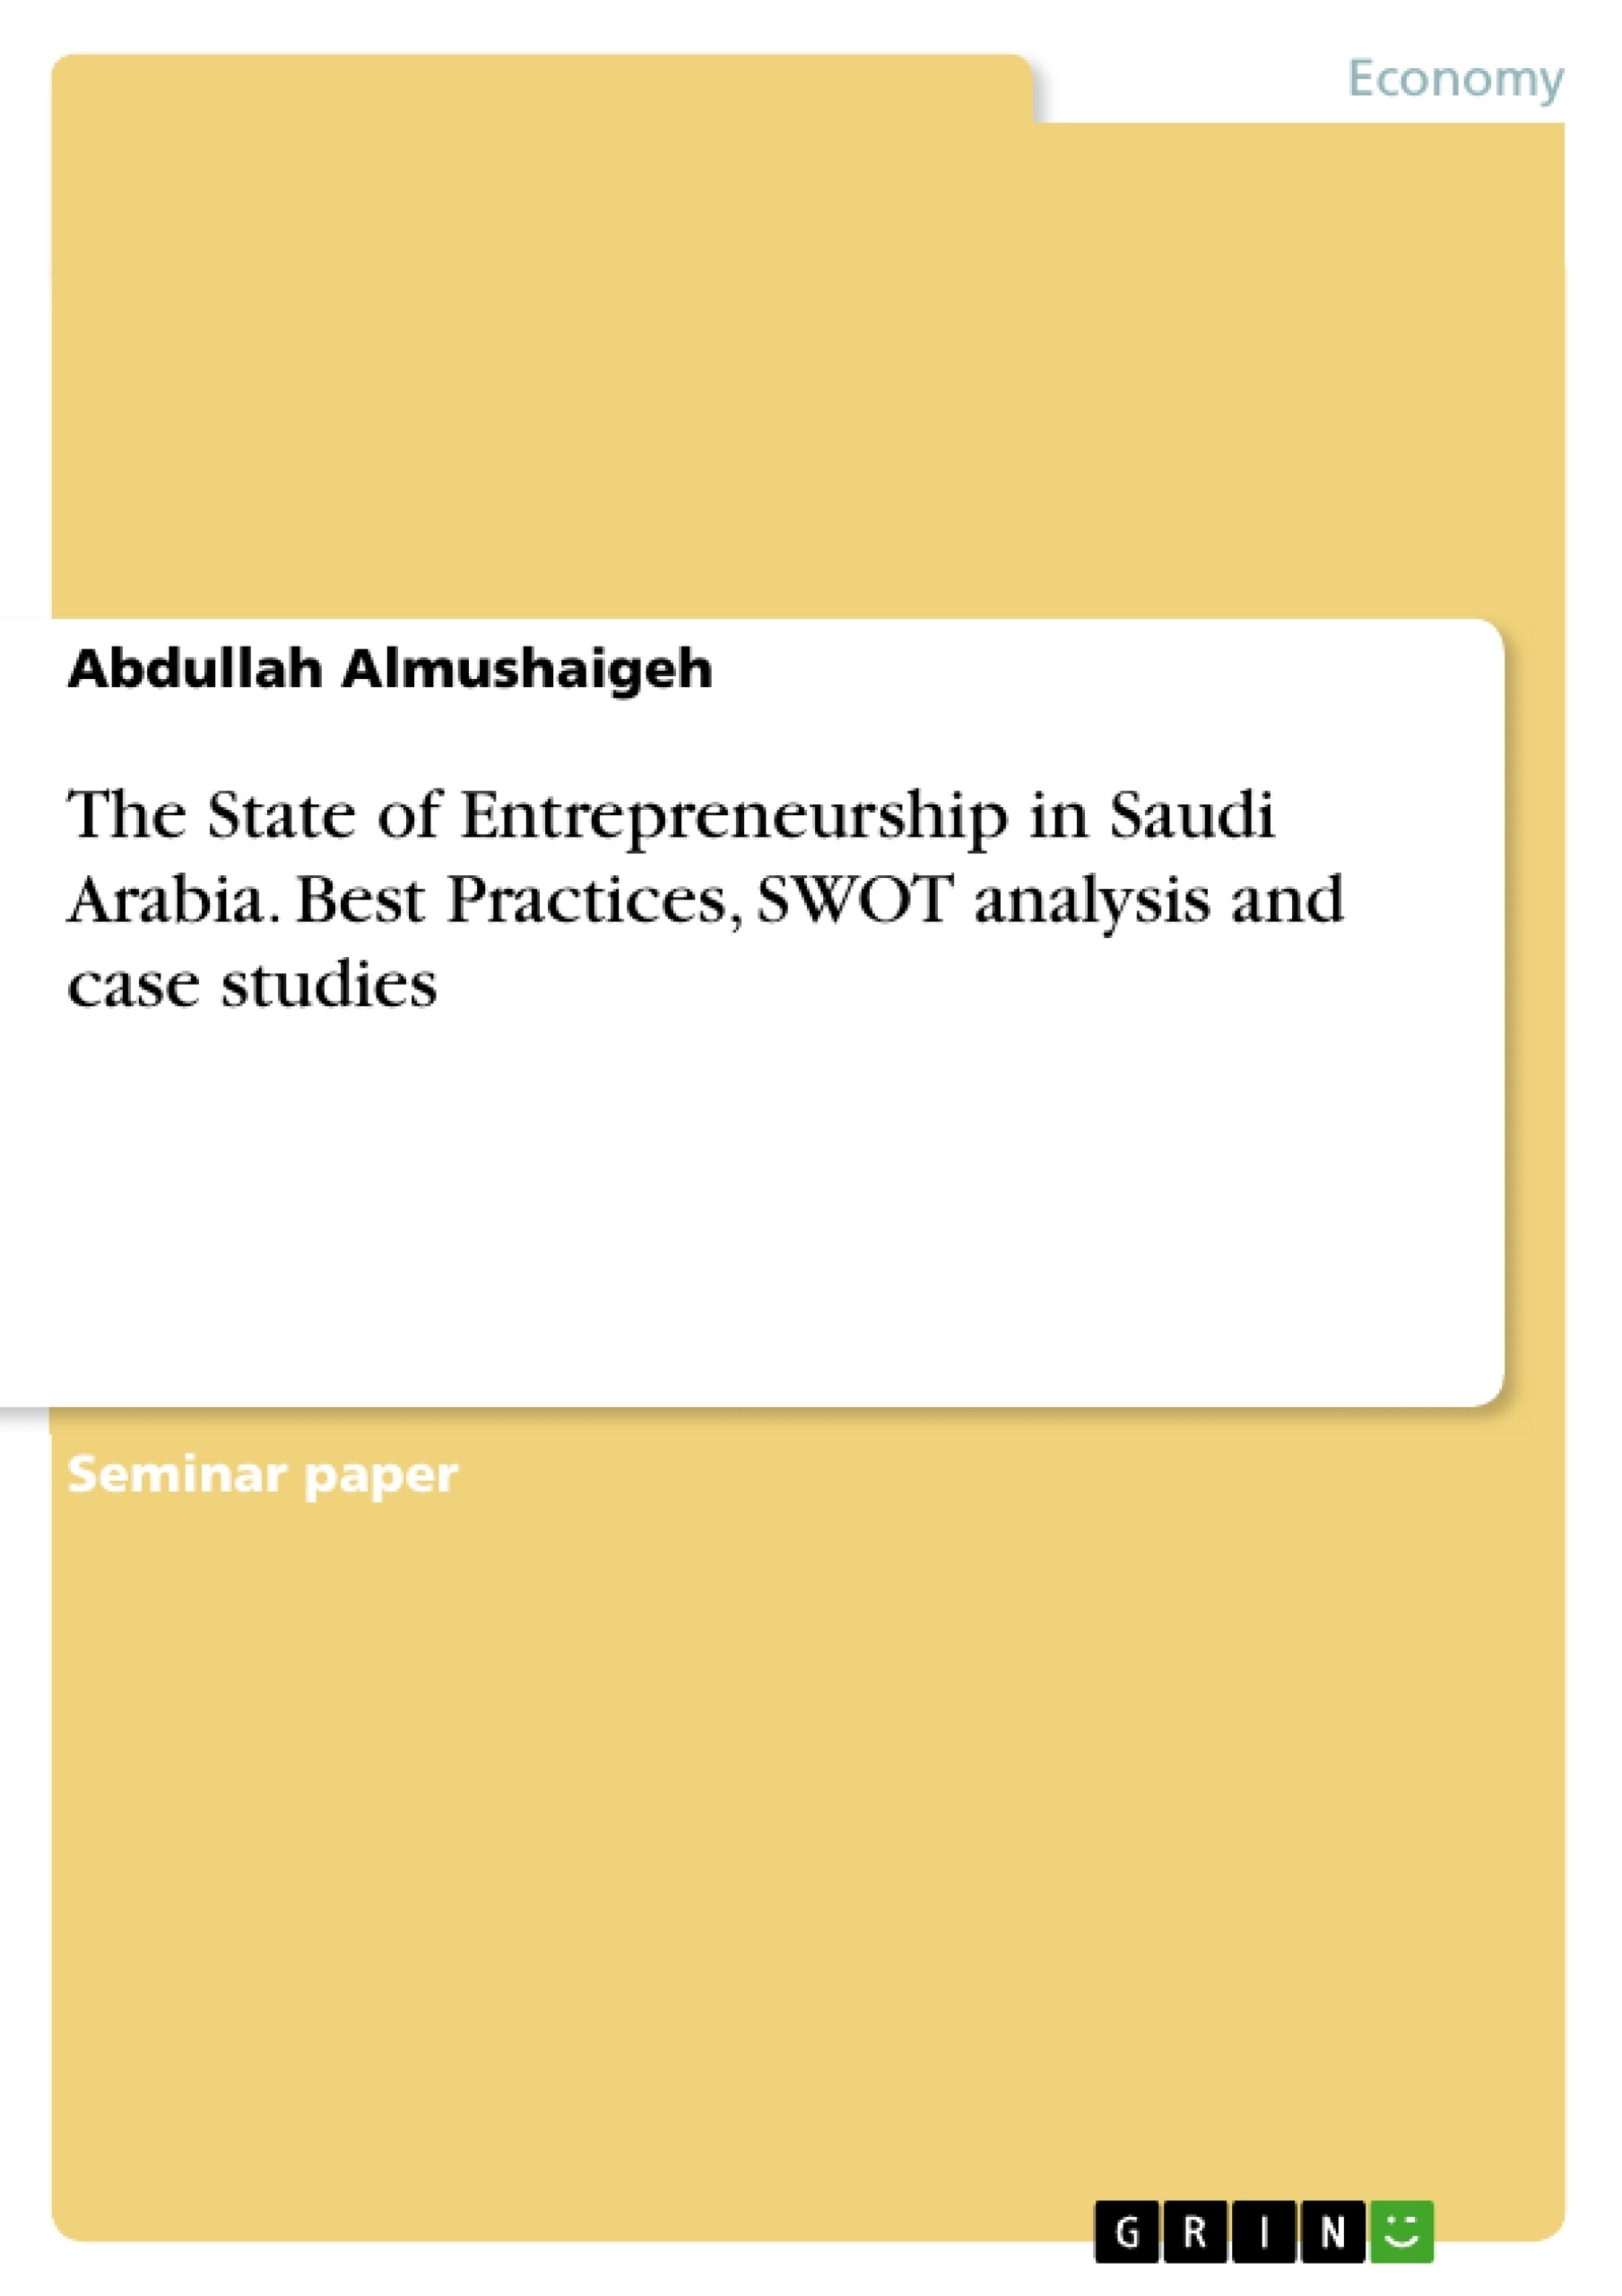 Título: The State of Entrepreneurship in Saudi Arabia. Best Practices, SWOT analysis and case studies